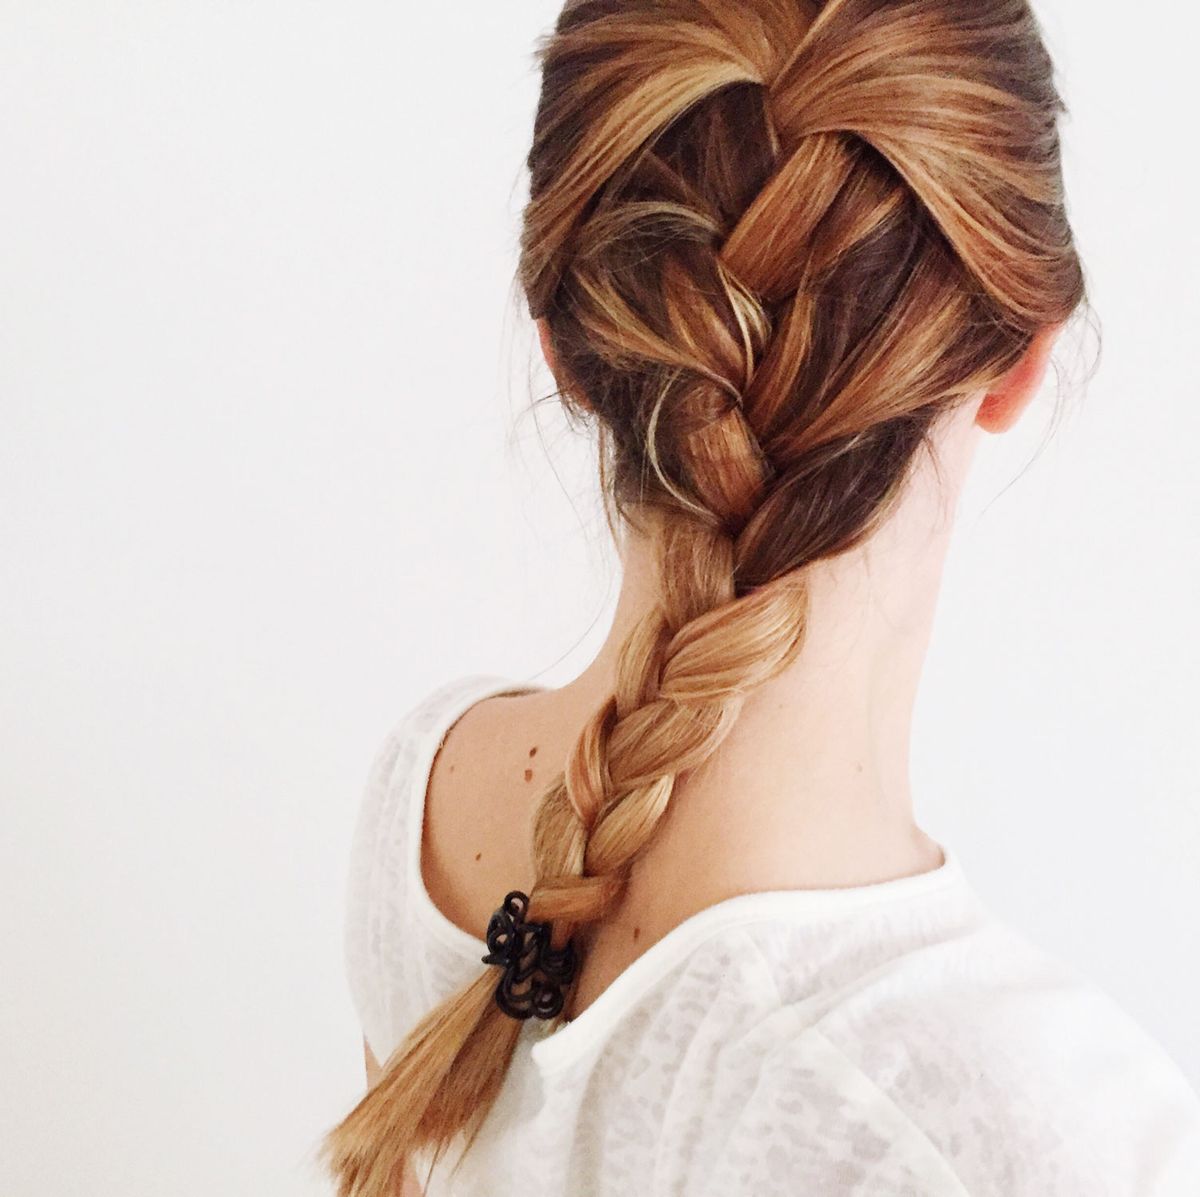 To braid or not to braid